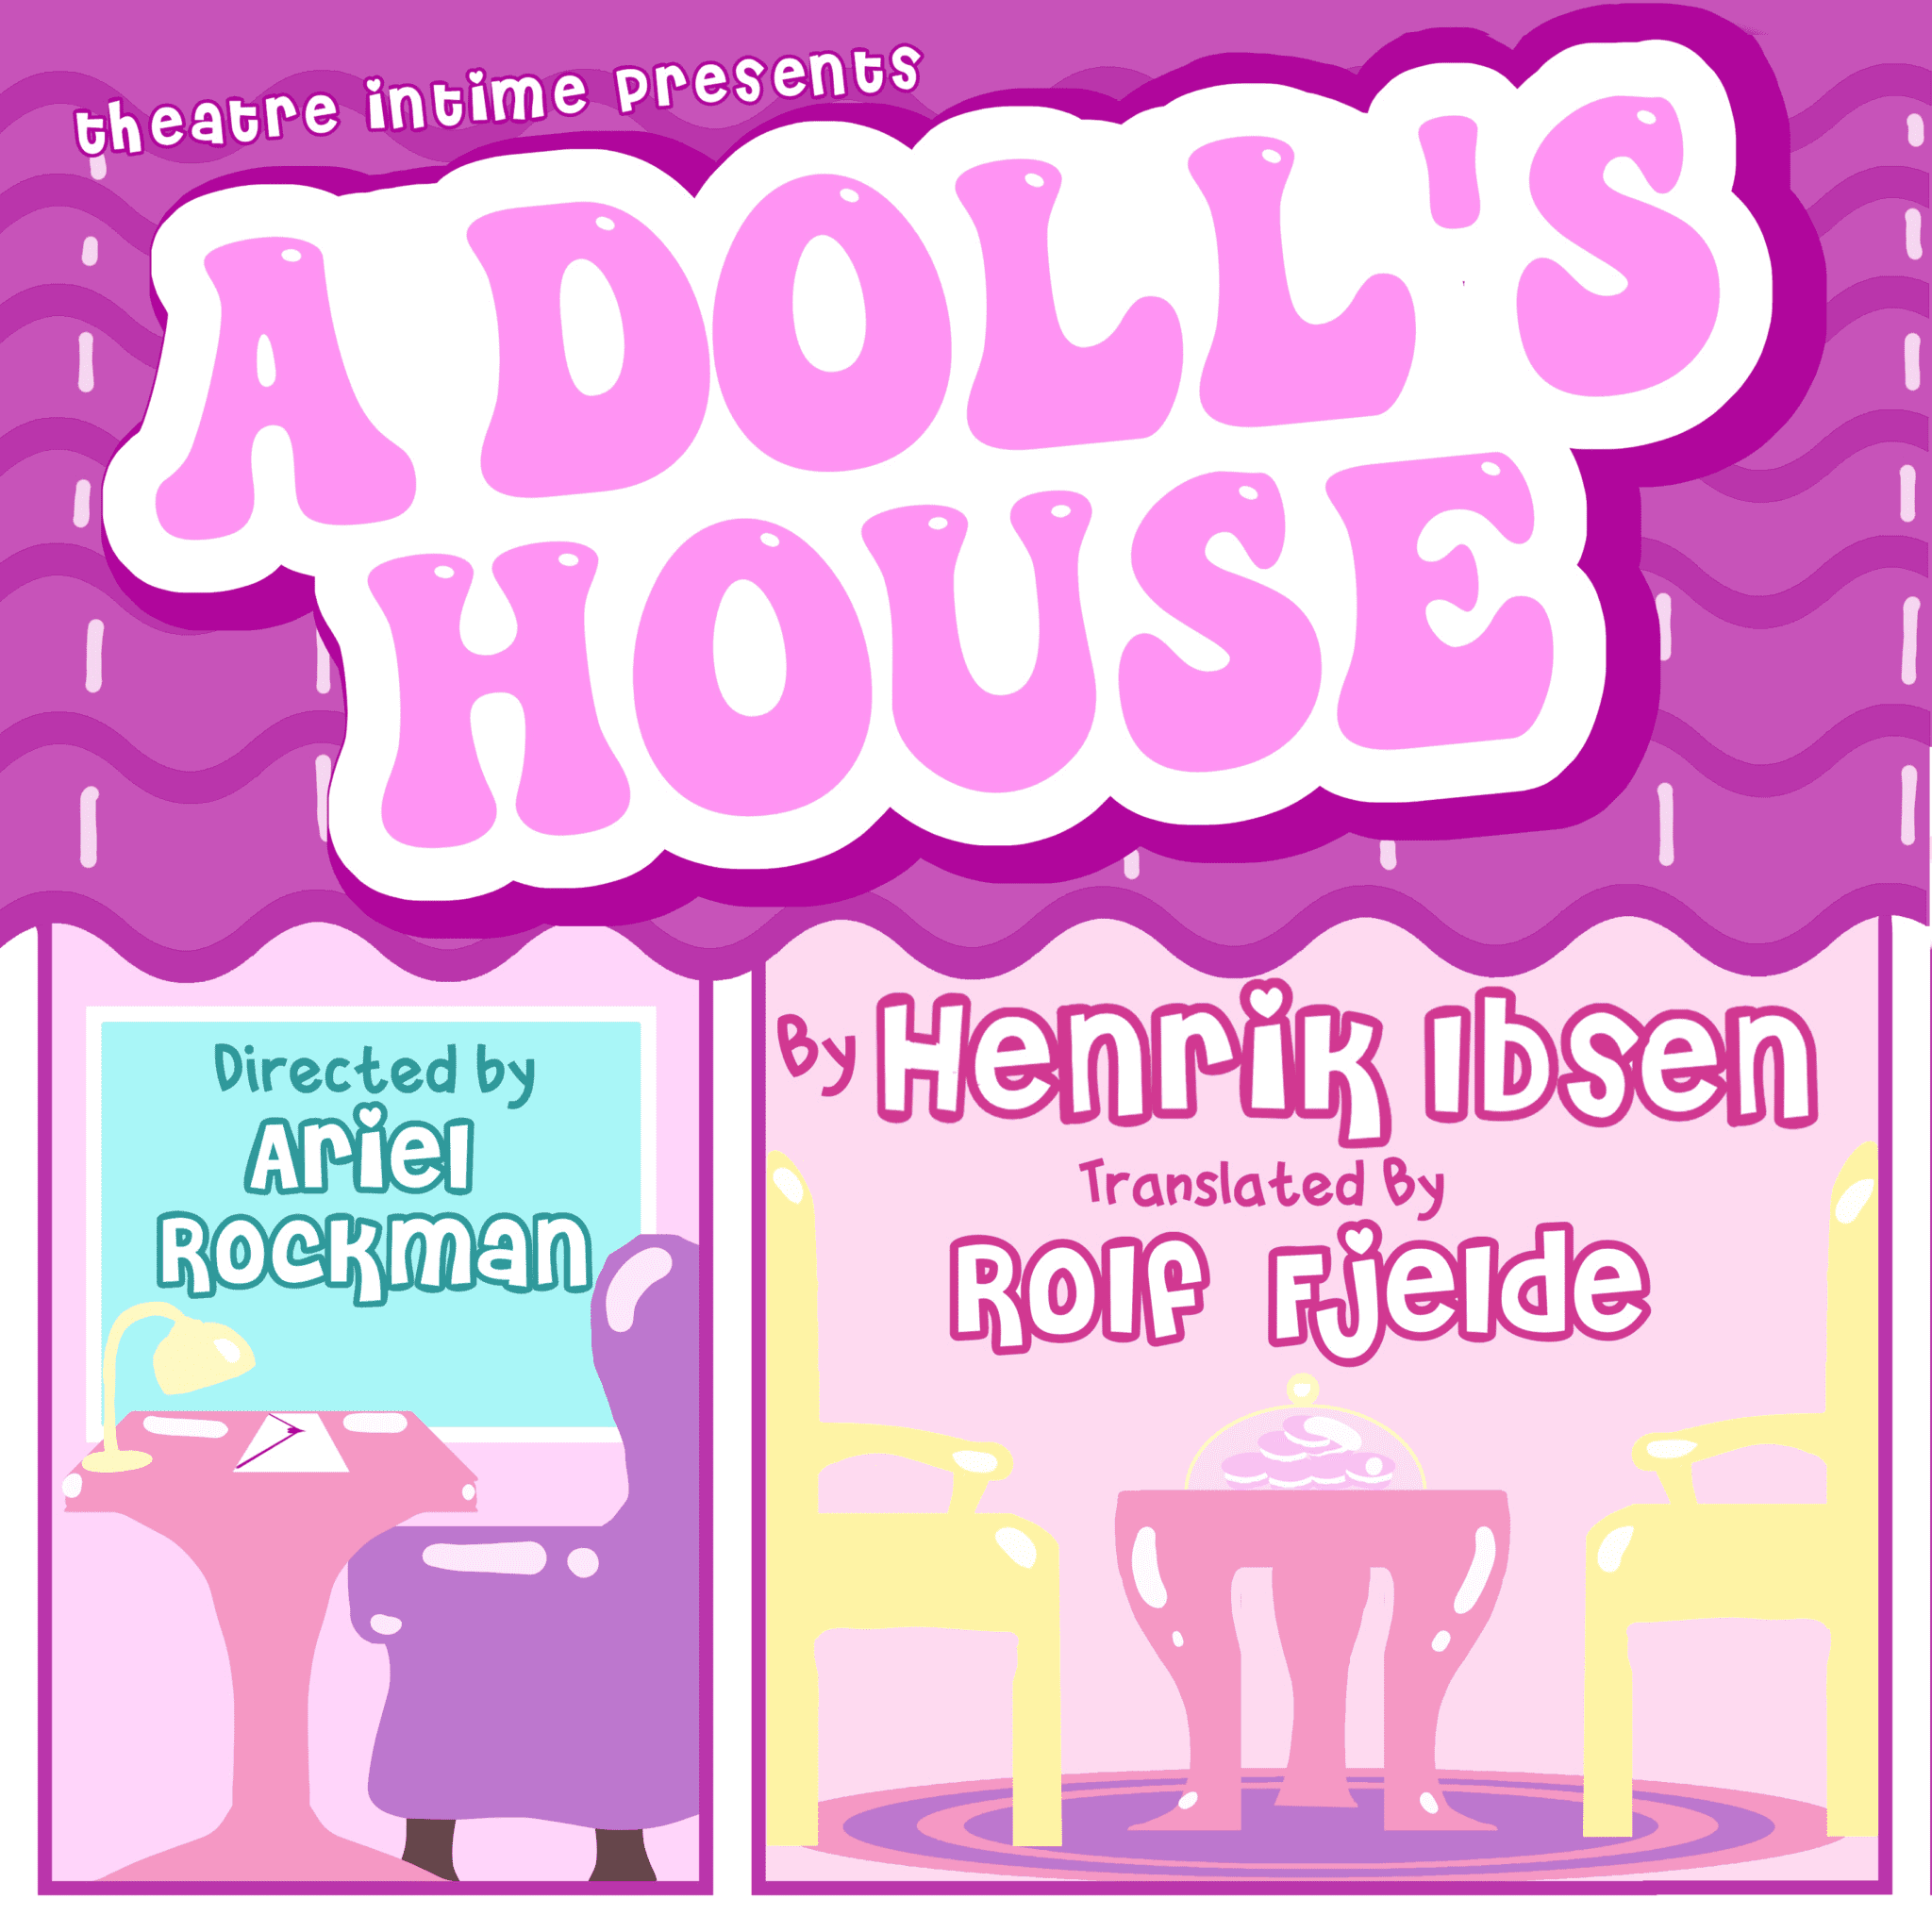 Invited to watch the drama A Doll's House